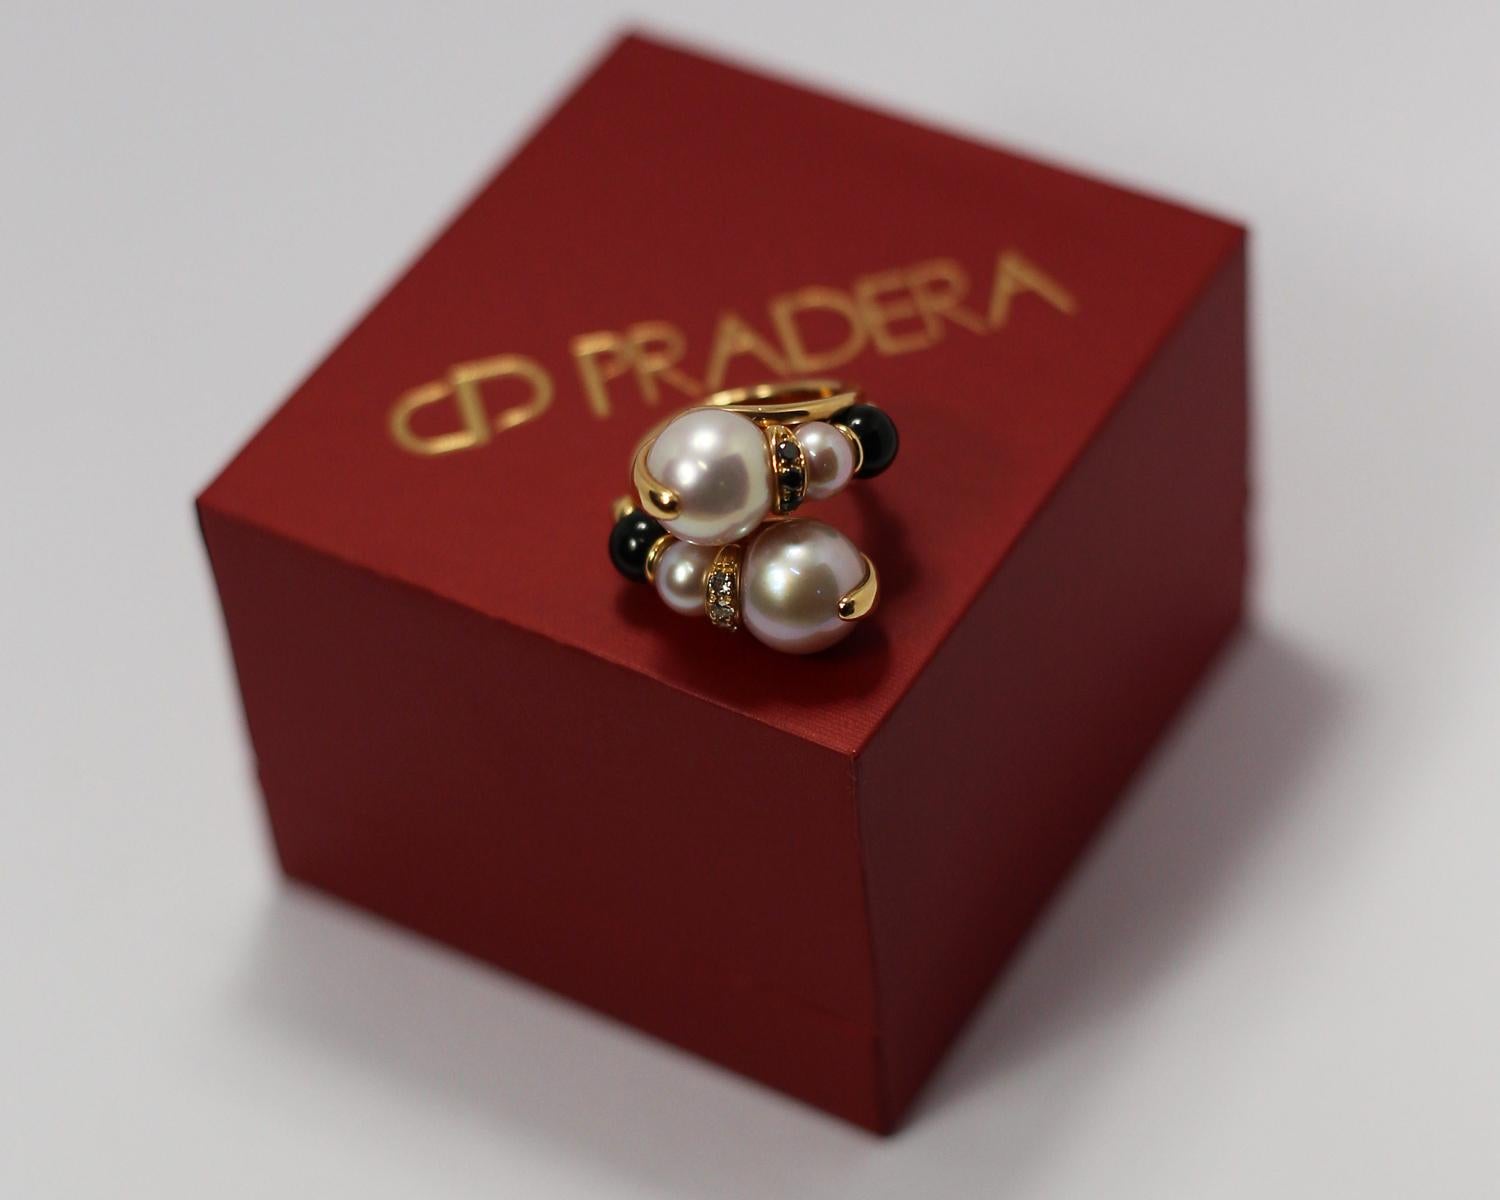 Mangiarotti Pearl and Onyx Twist 18k Gold Ring with White and Black Diamonds 1